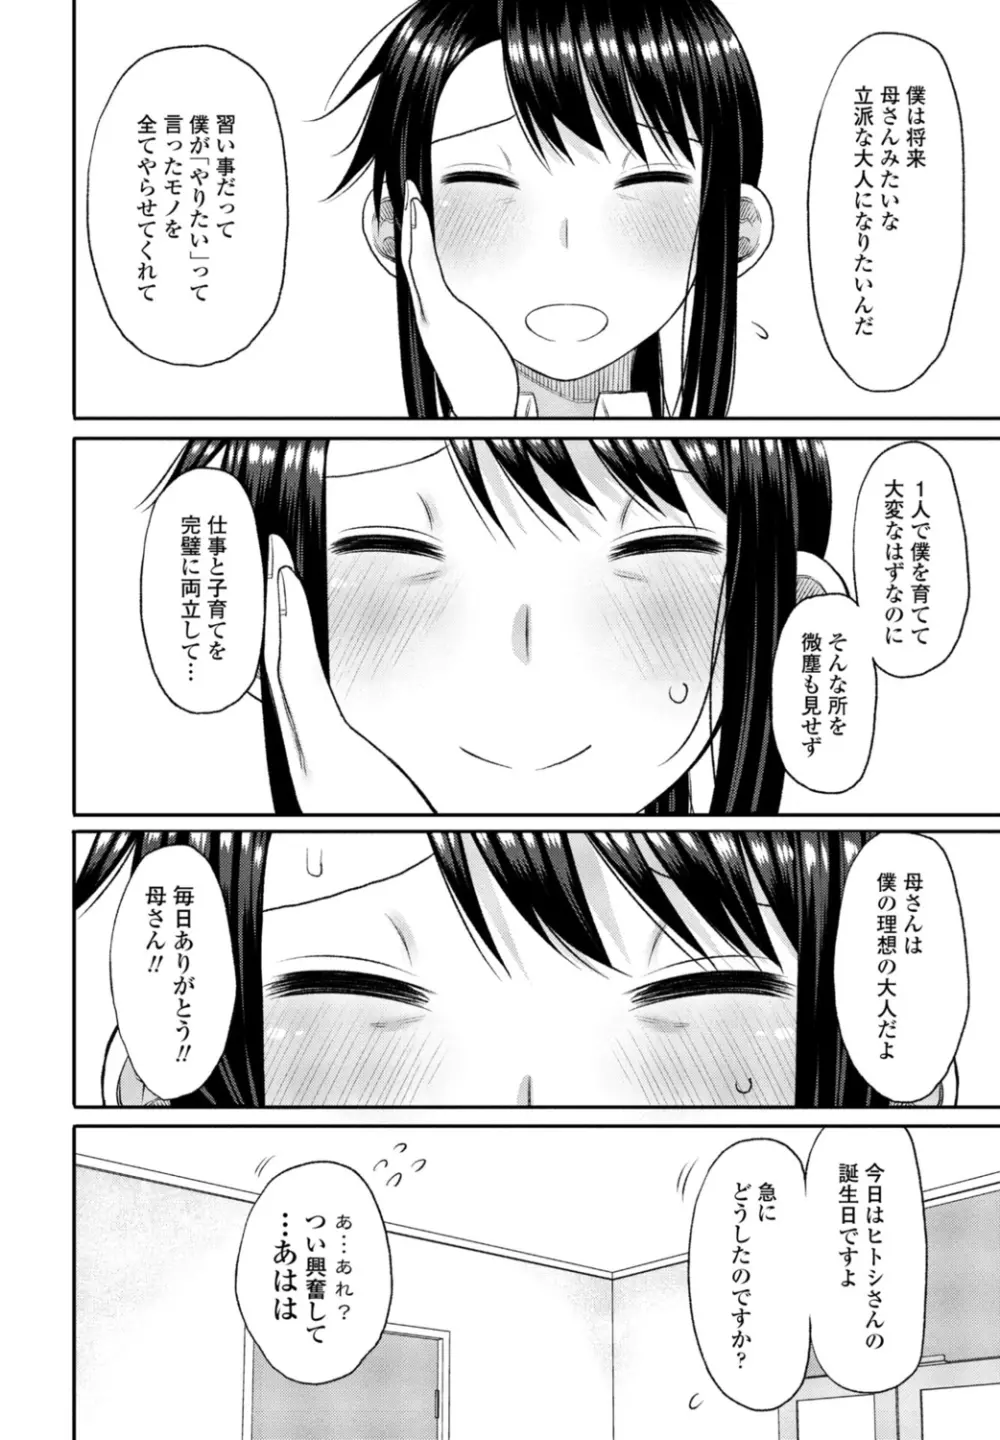 COMIC 桃姫DEEPEST Vol. 1 Page.176